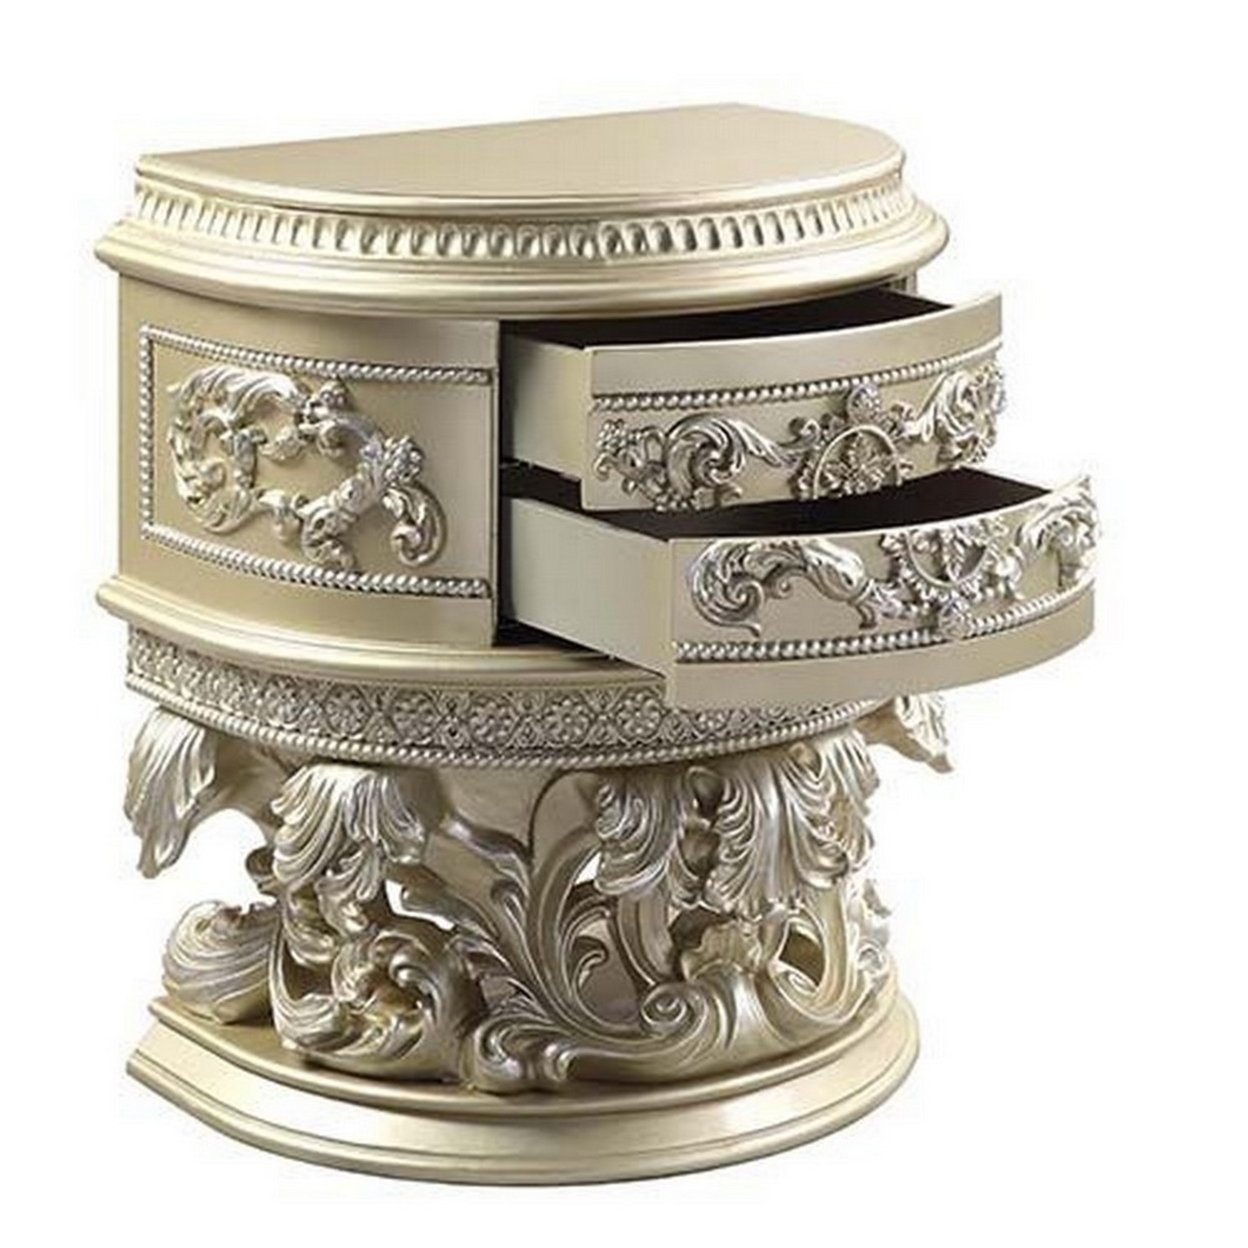 Nightstand With Scrolled Carvings And Half Moon Shape, Champagne Silver- Saltoro Sherpi